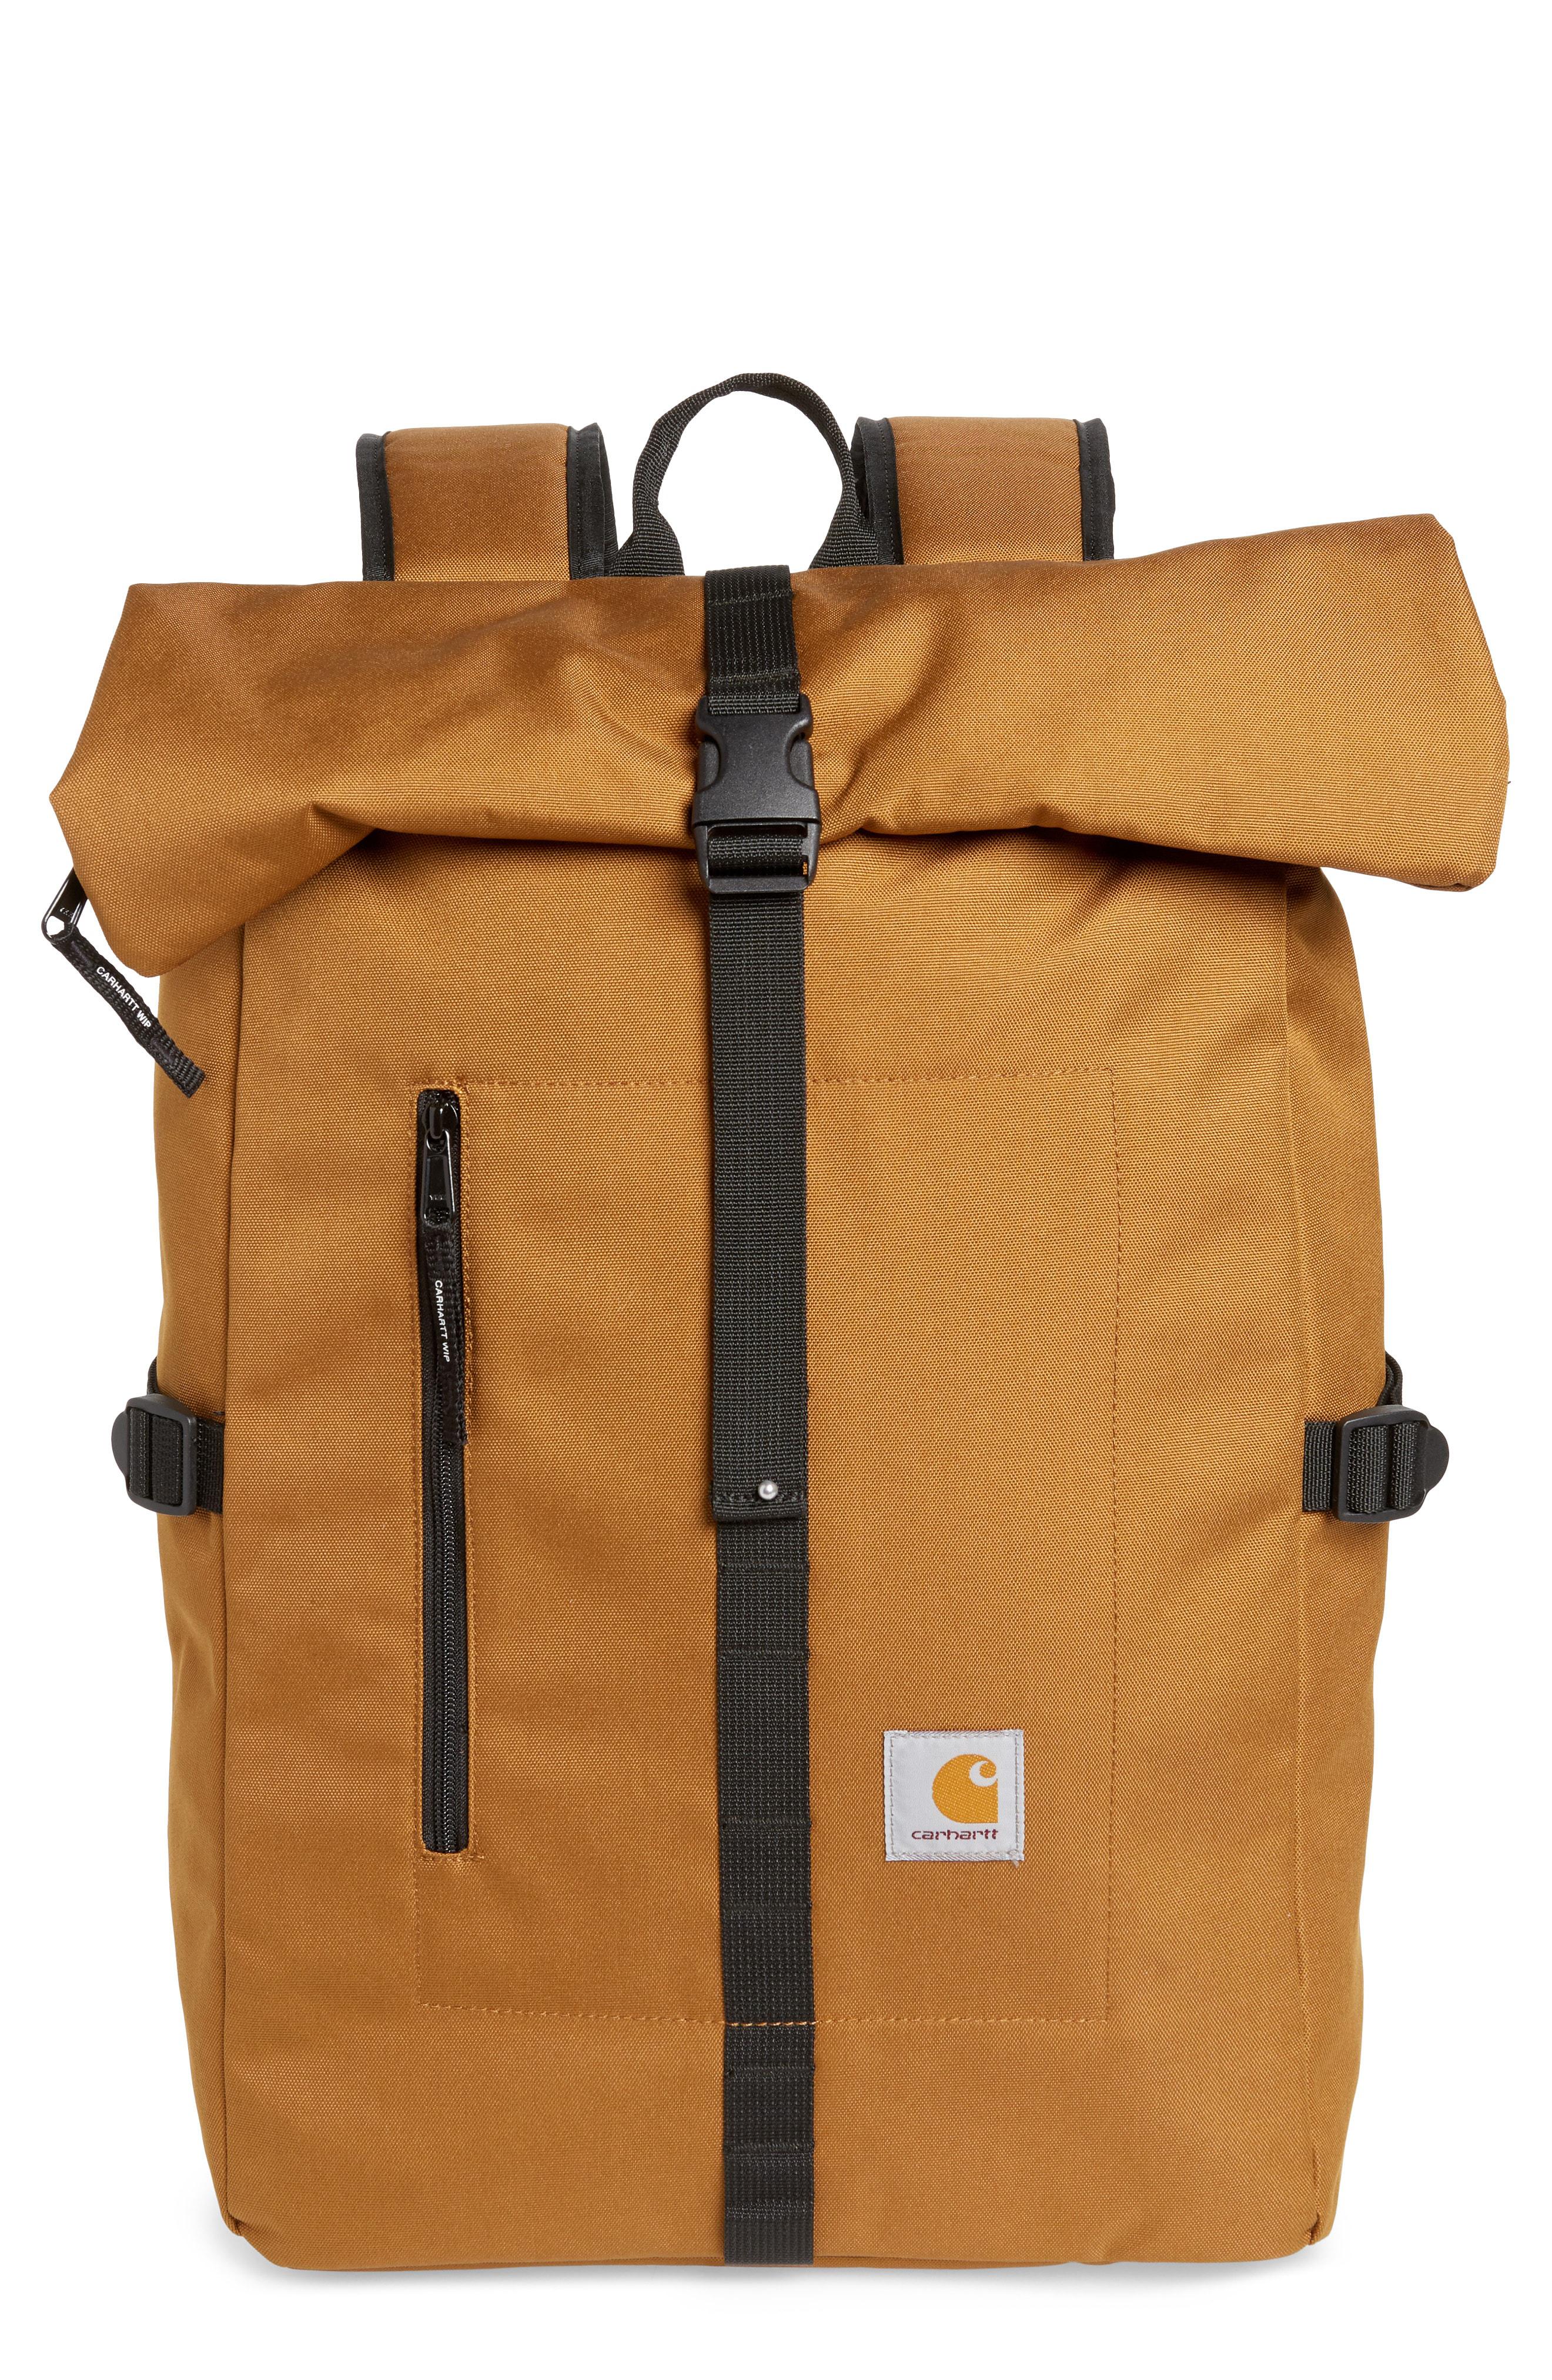 Carhartt WIP Canvas Phil Backpack in Brown for Men - Lyst